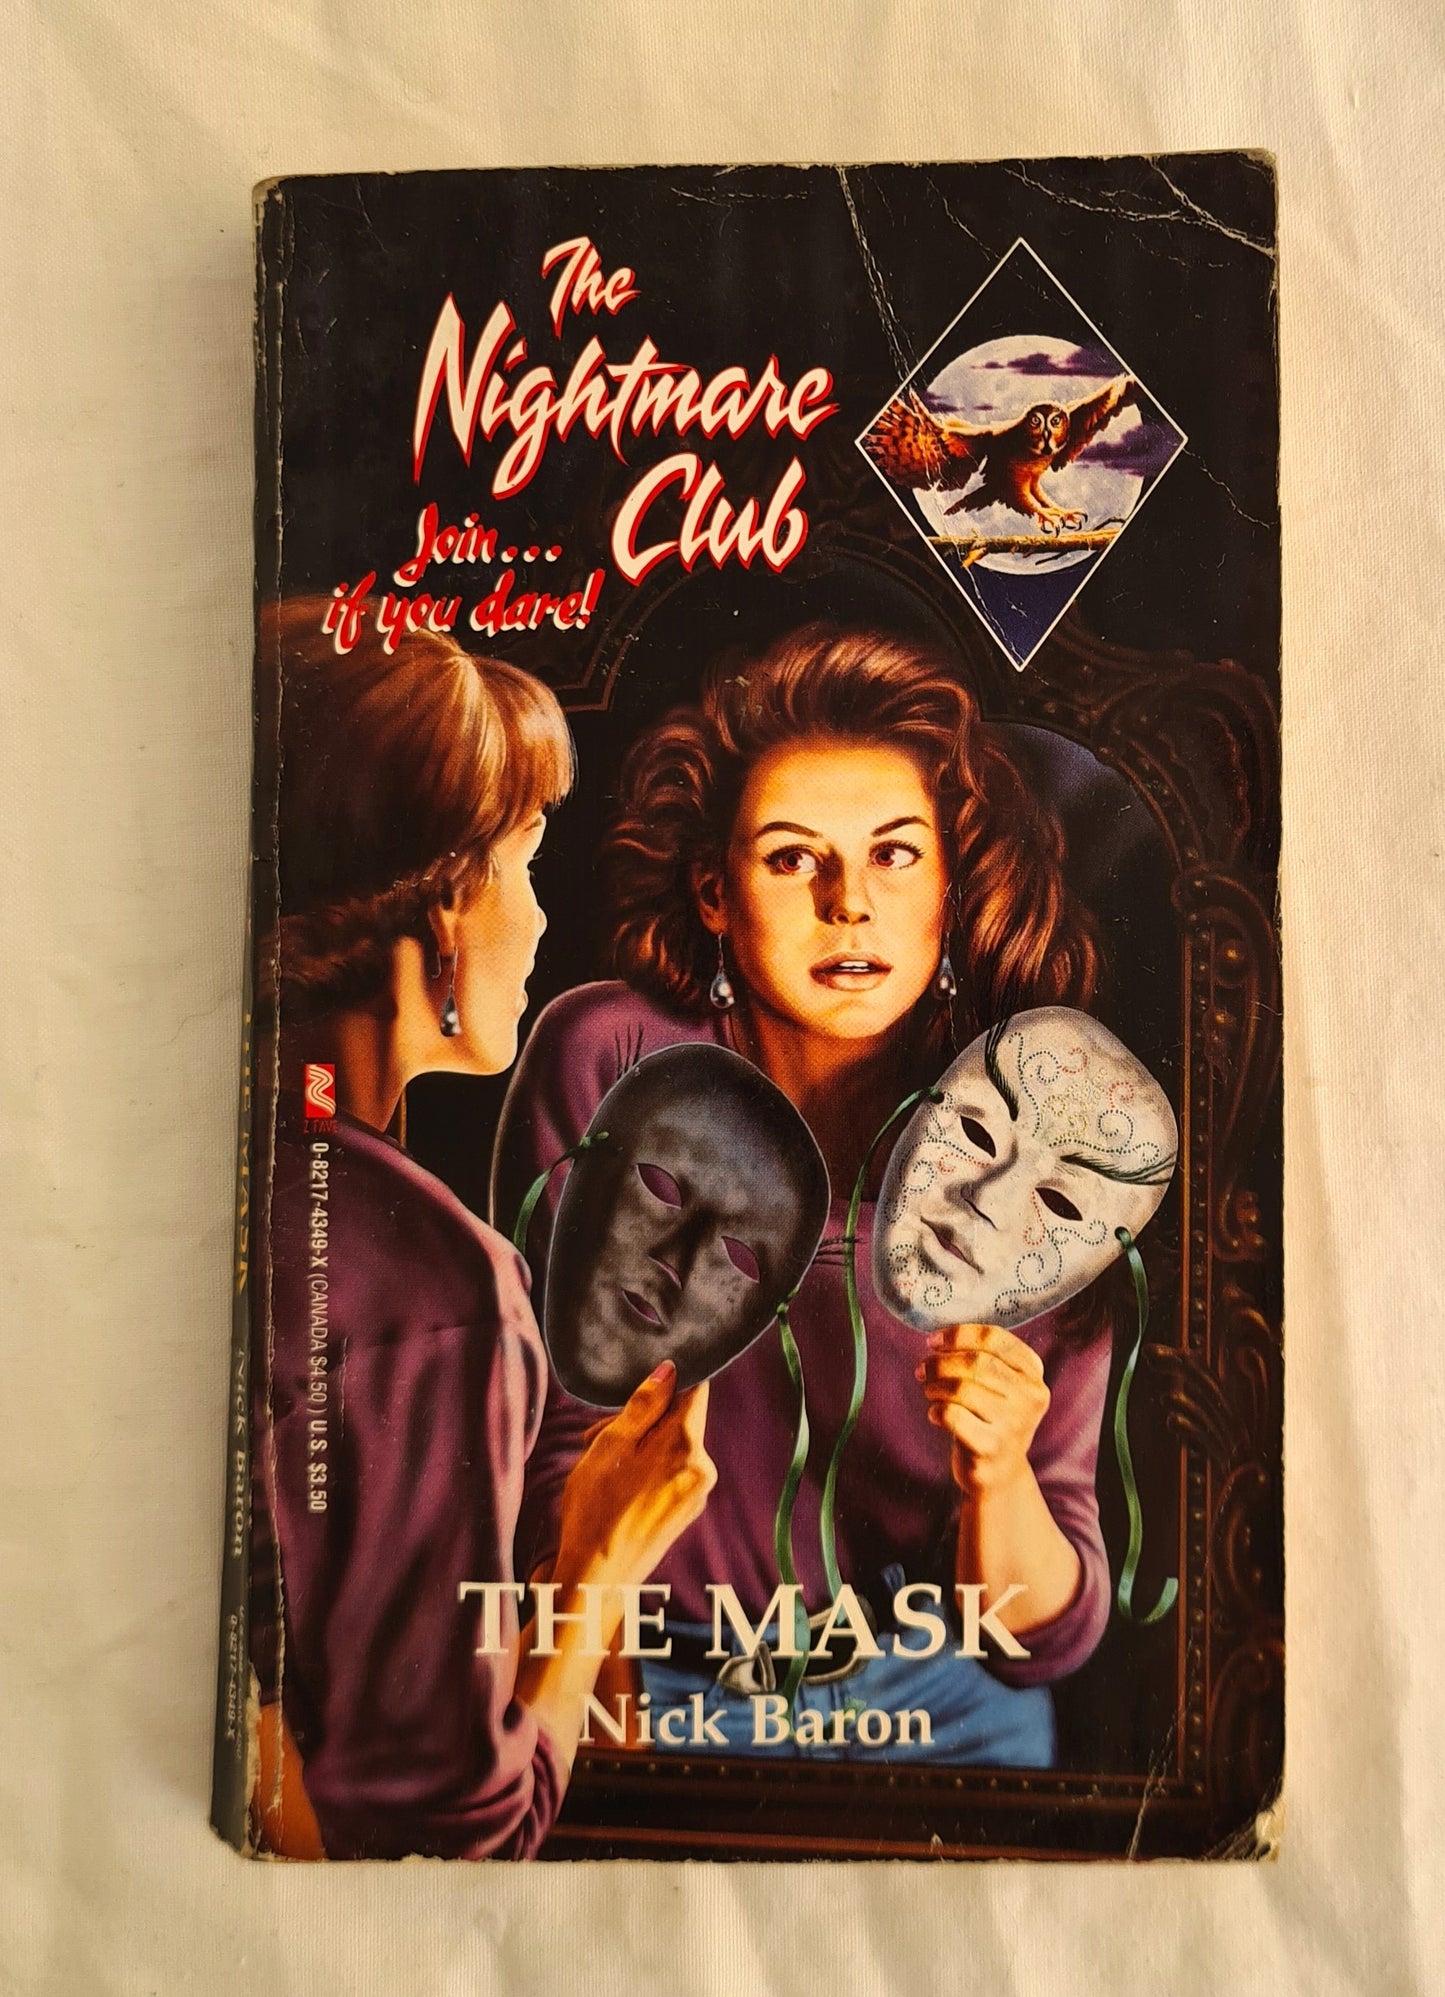 The Mask  The Nightmare Club #4  by Nick Baron